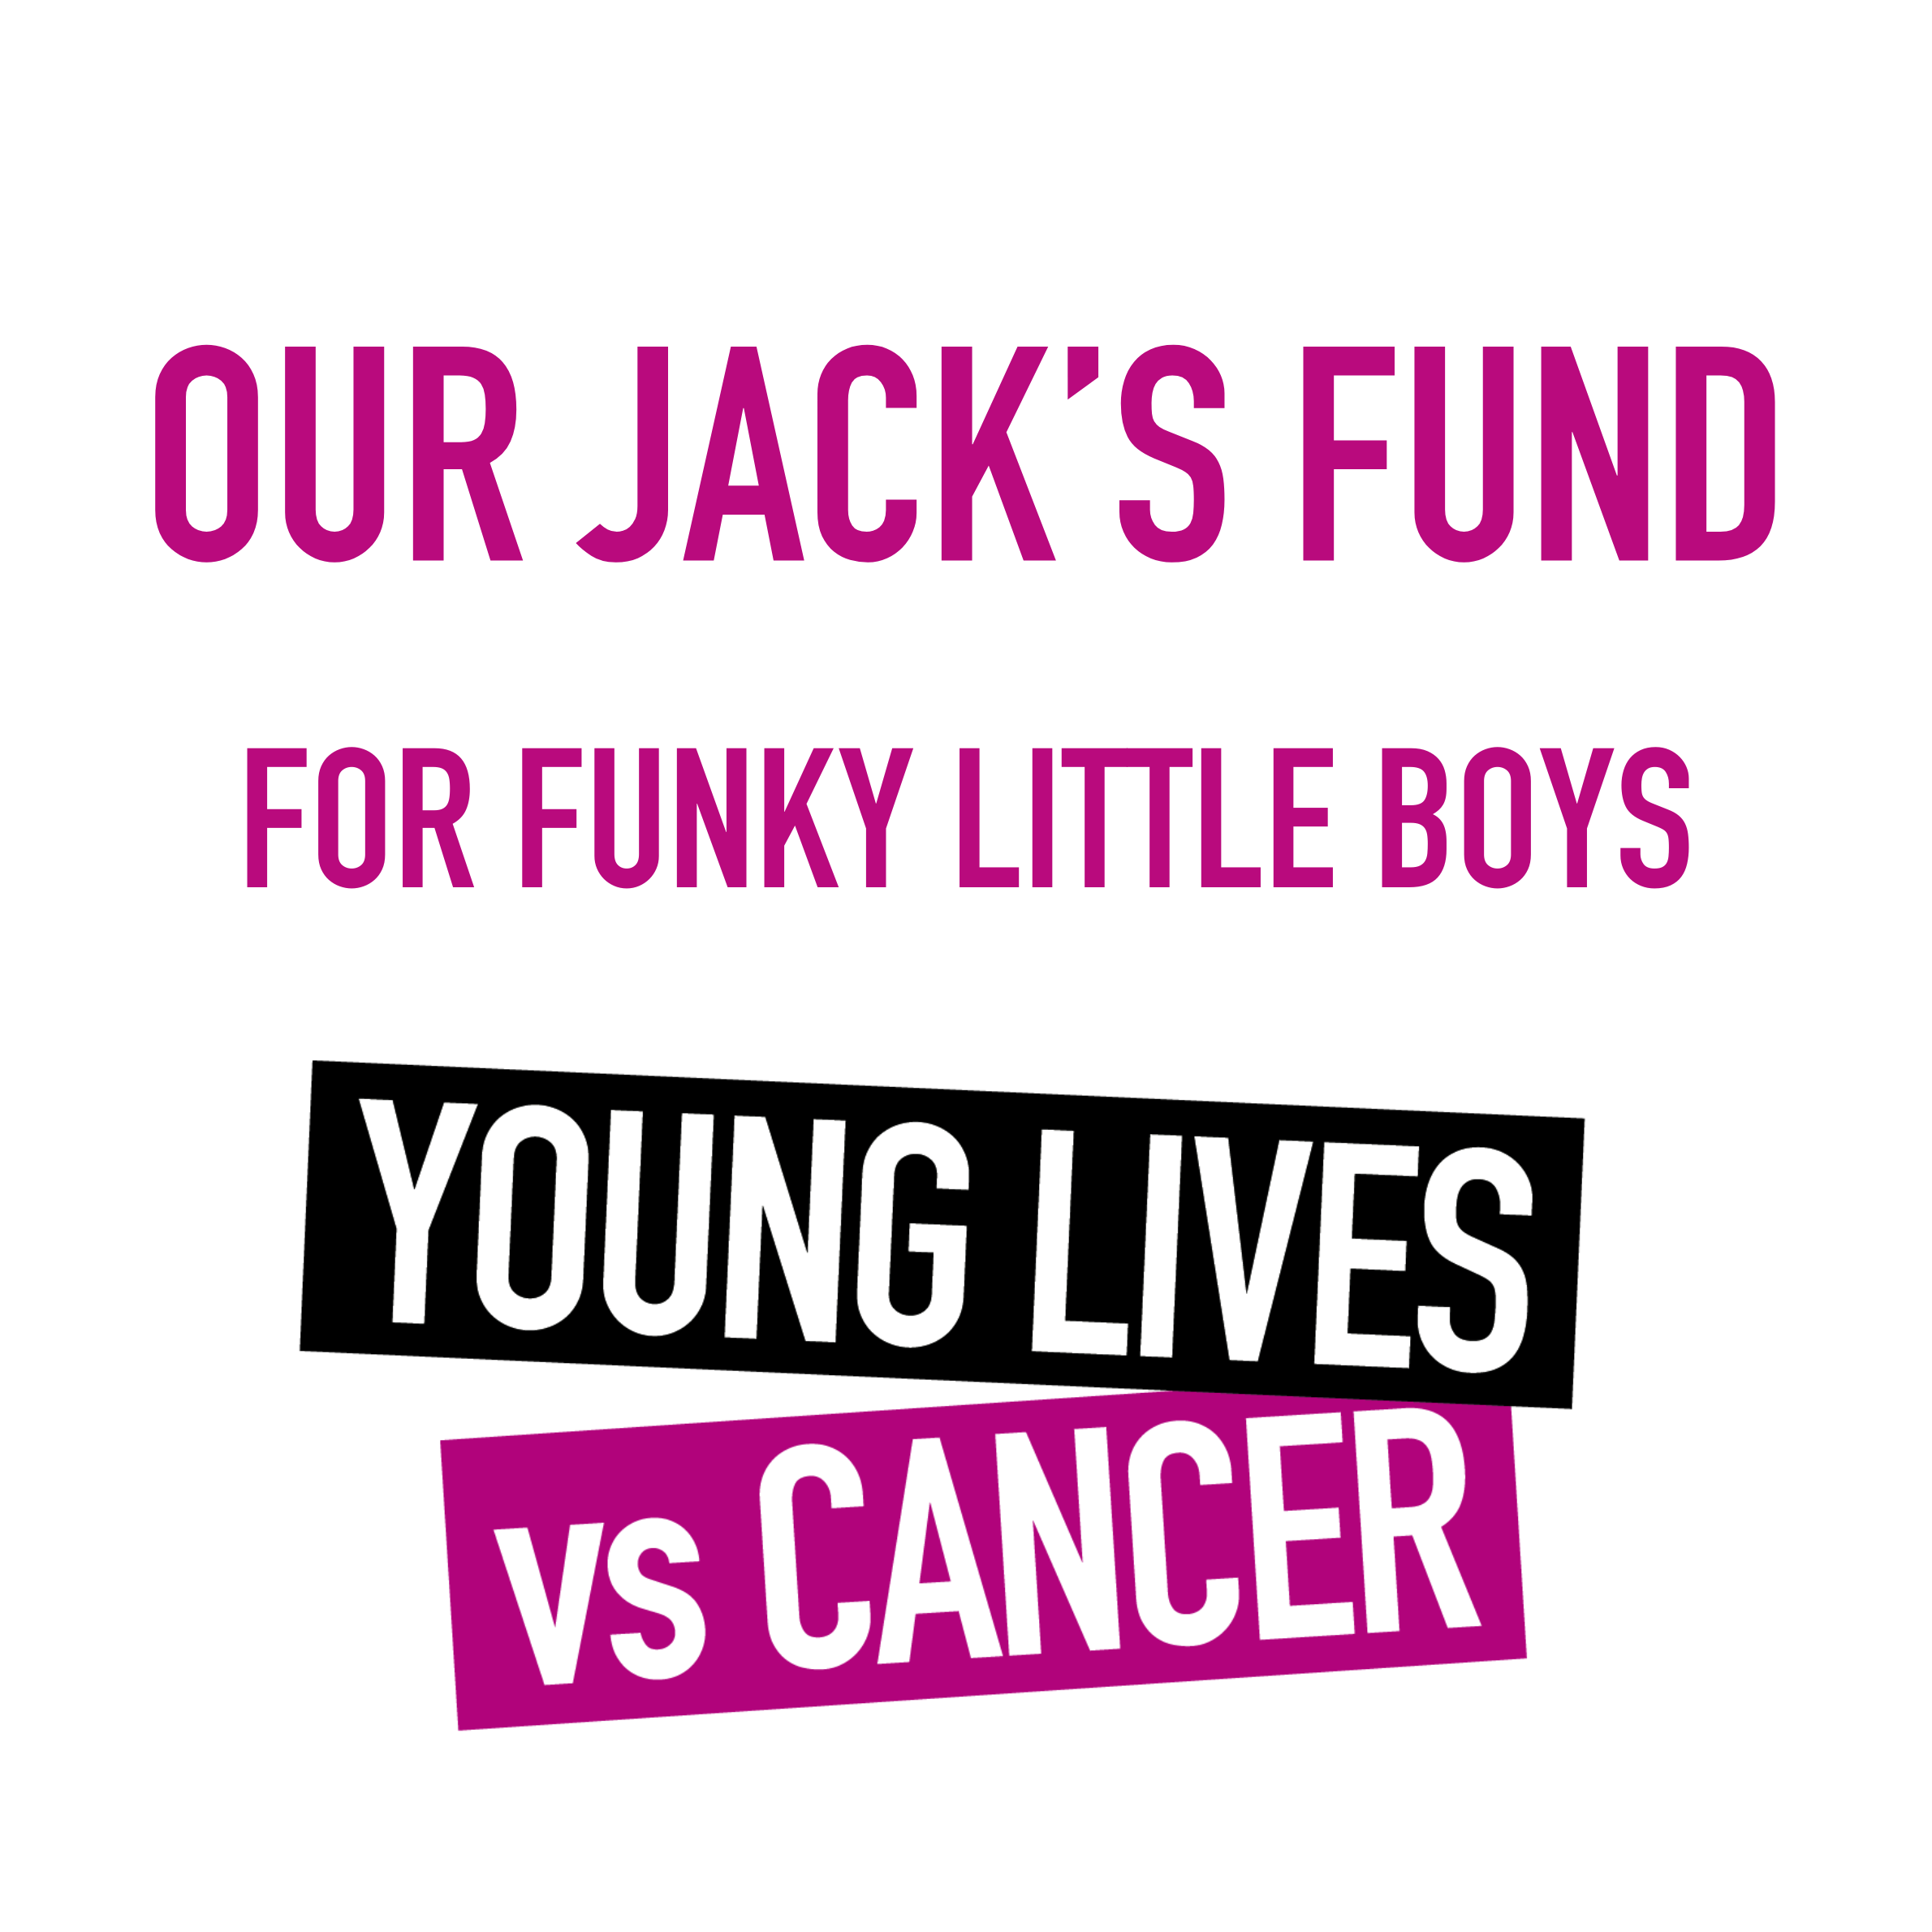 Our Jack's Fund with Young Lives vs Cancer logo